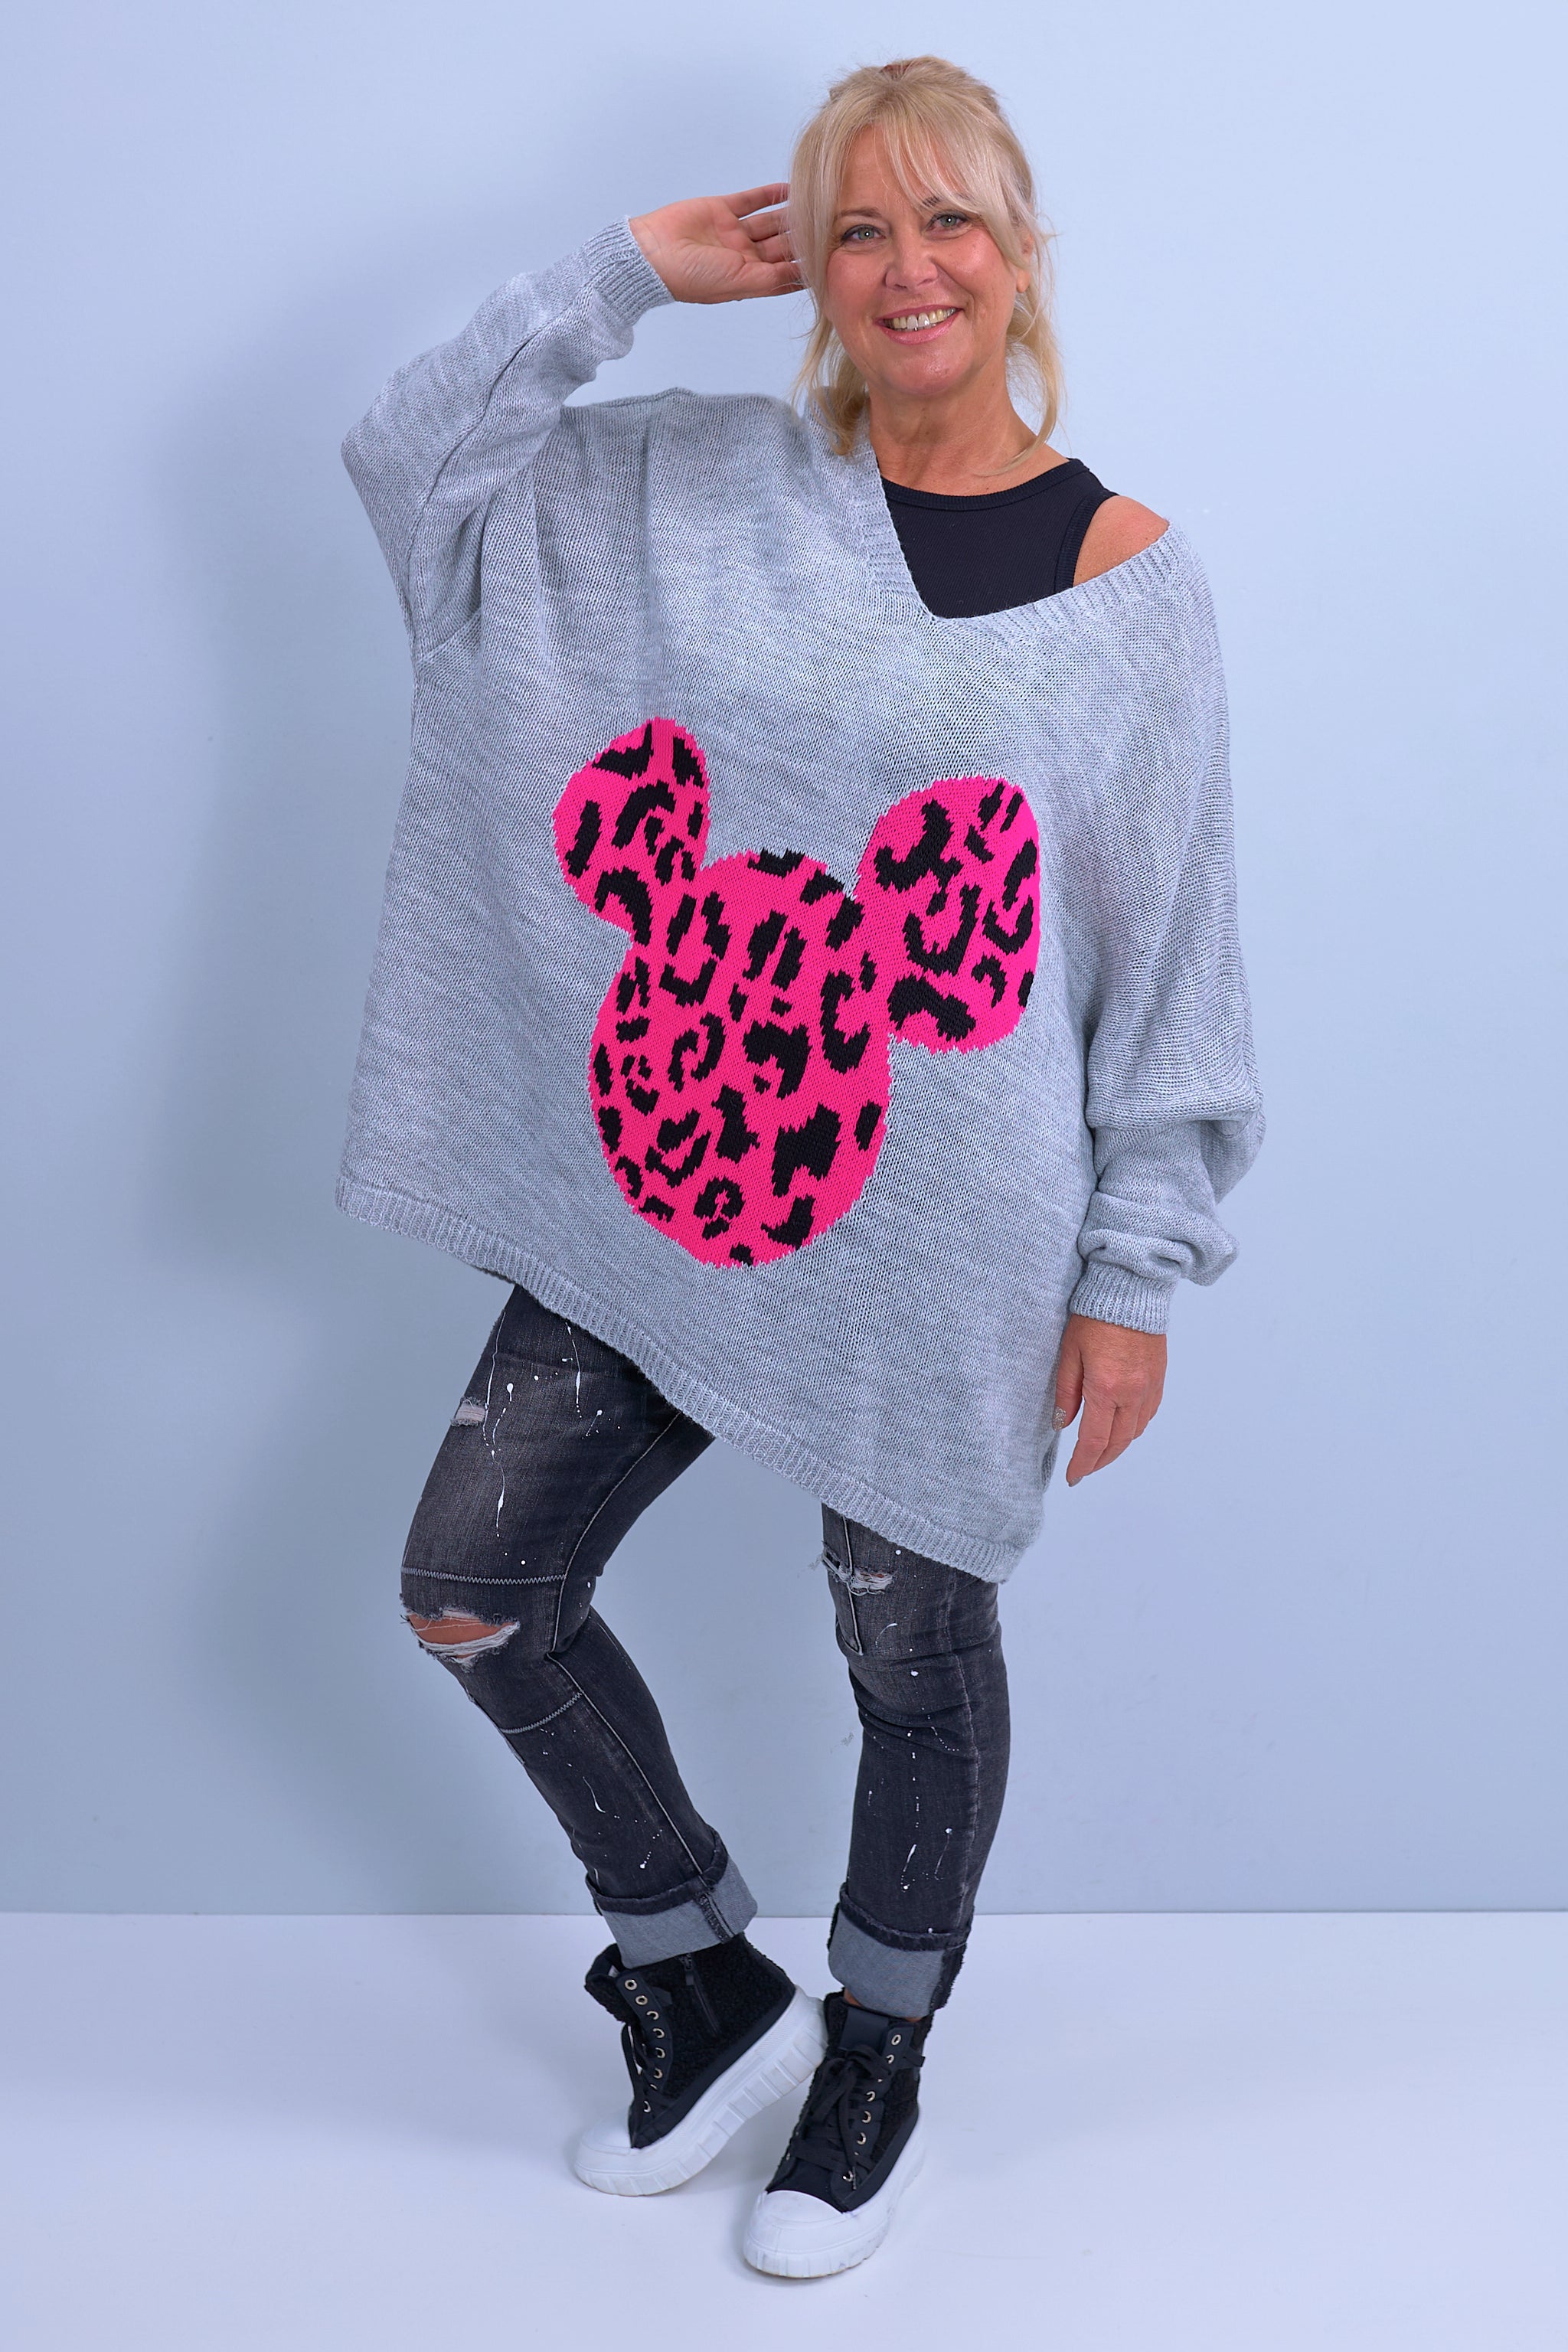 Oversized knitted sweater with motif, grey-pink